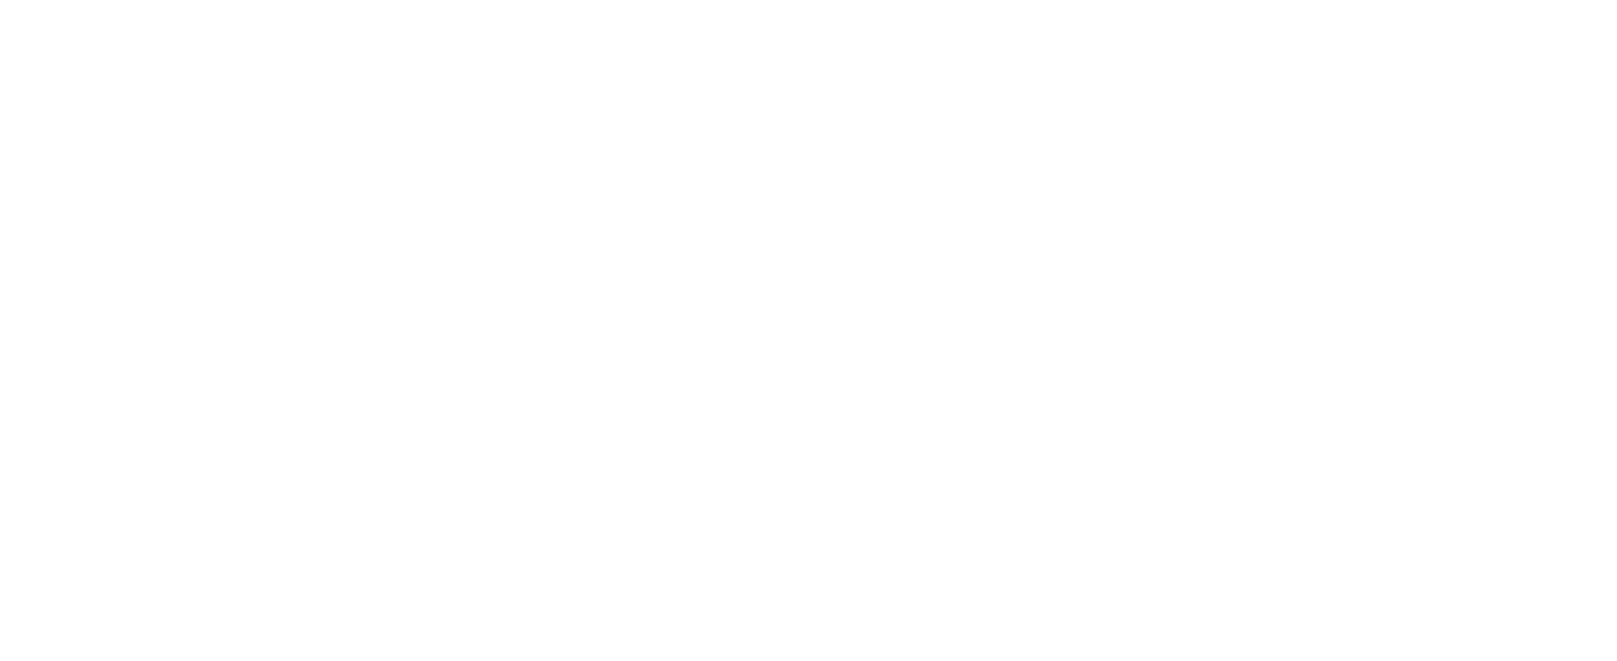 Welcome to TheDroneUps.com